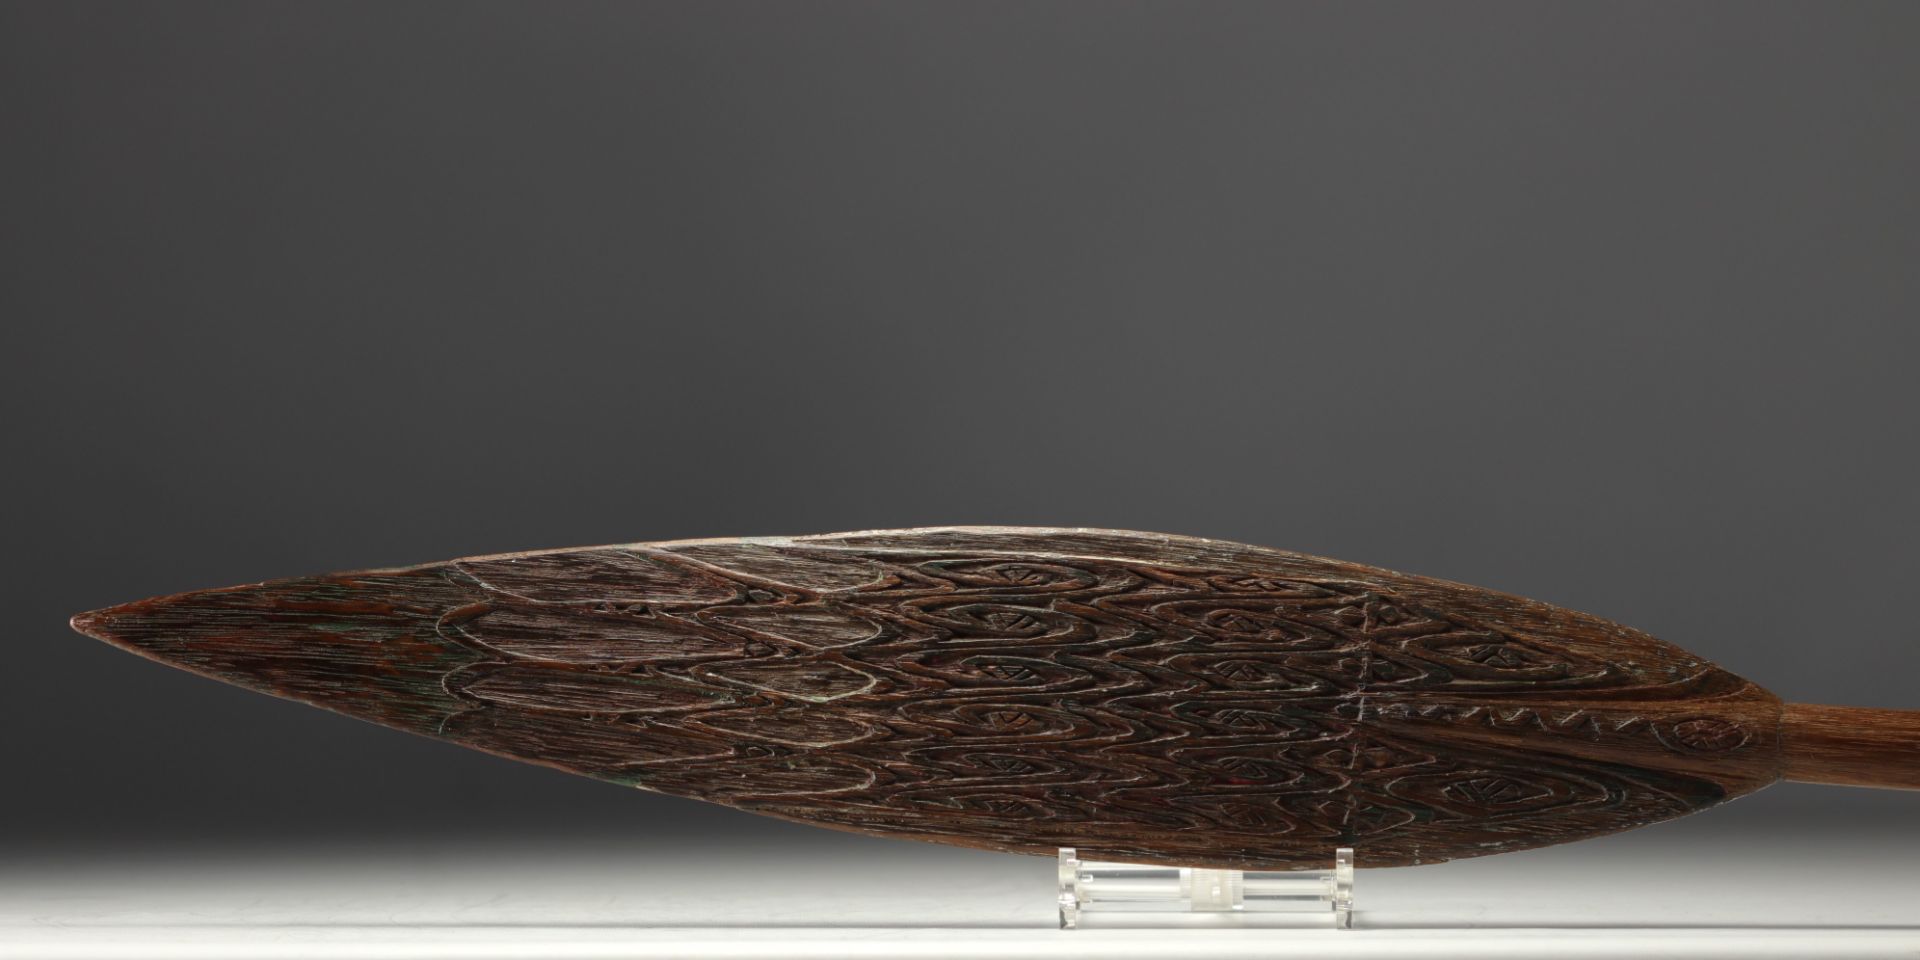 New Guinea, Sepik, Ceremonial paddle in carved wood with traces of polychromy. - Image 2 of 3